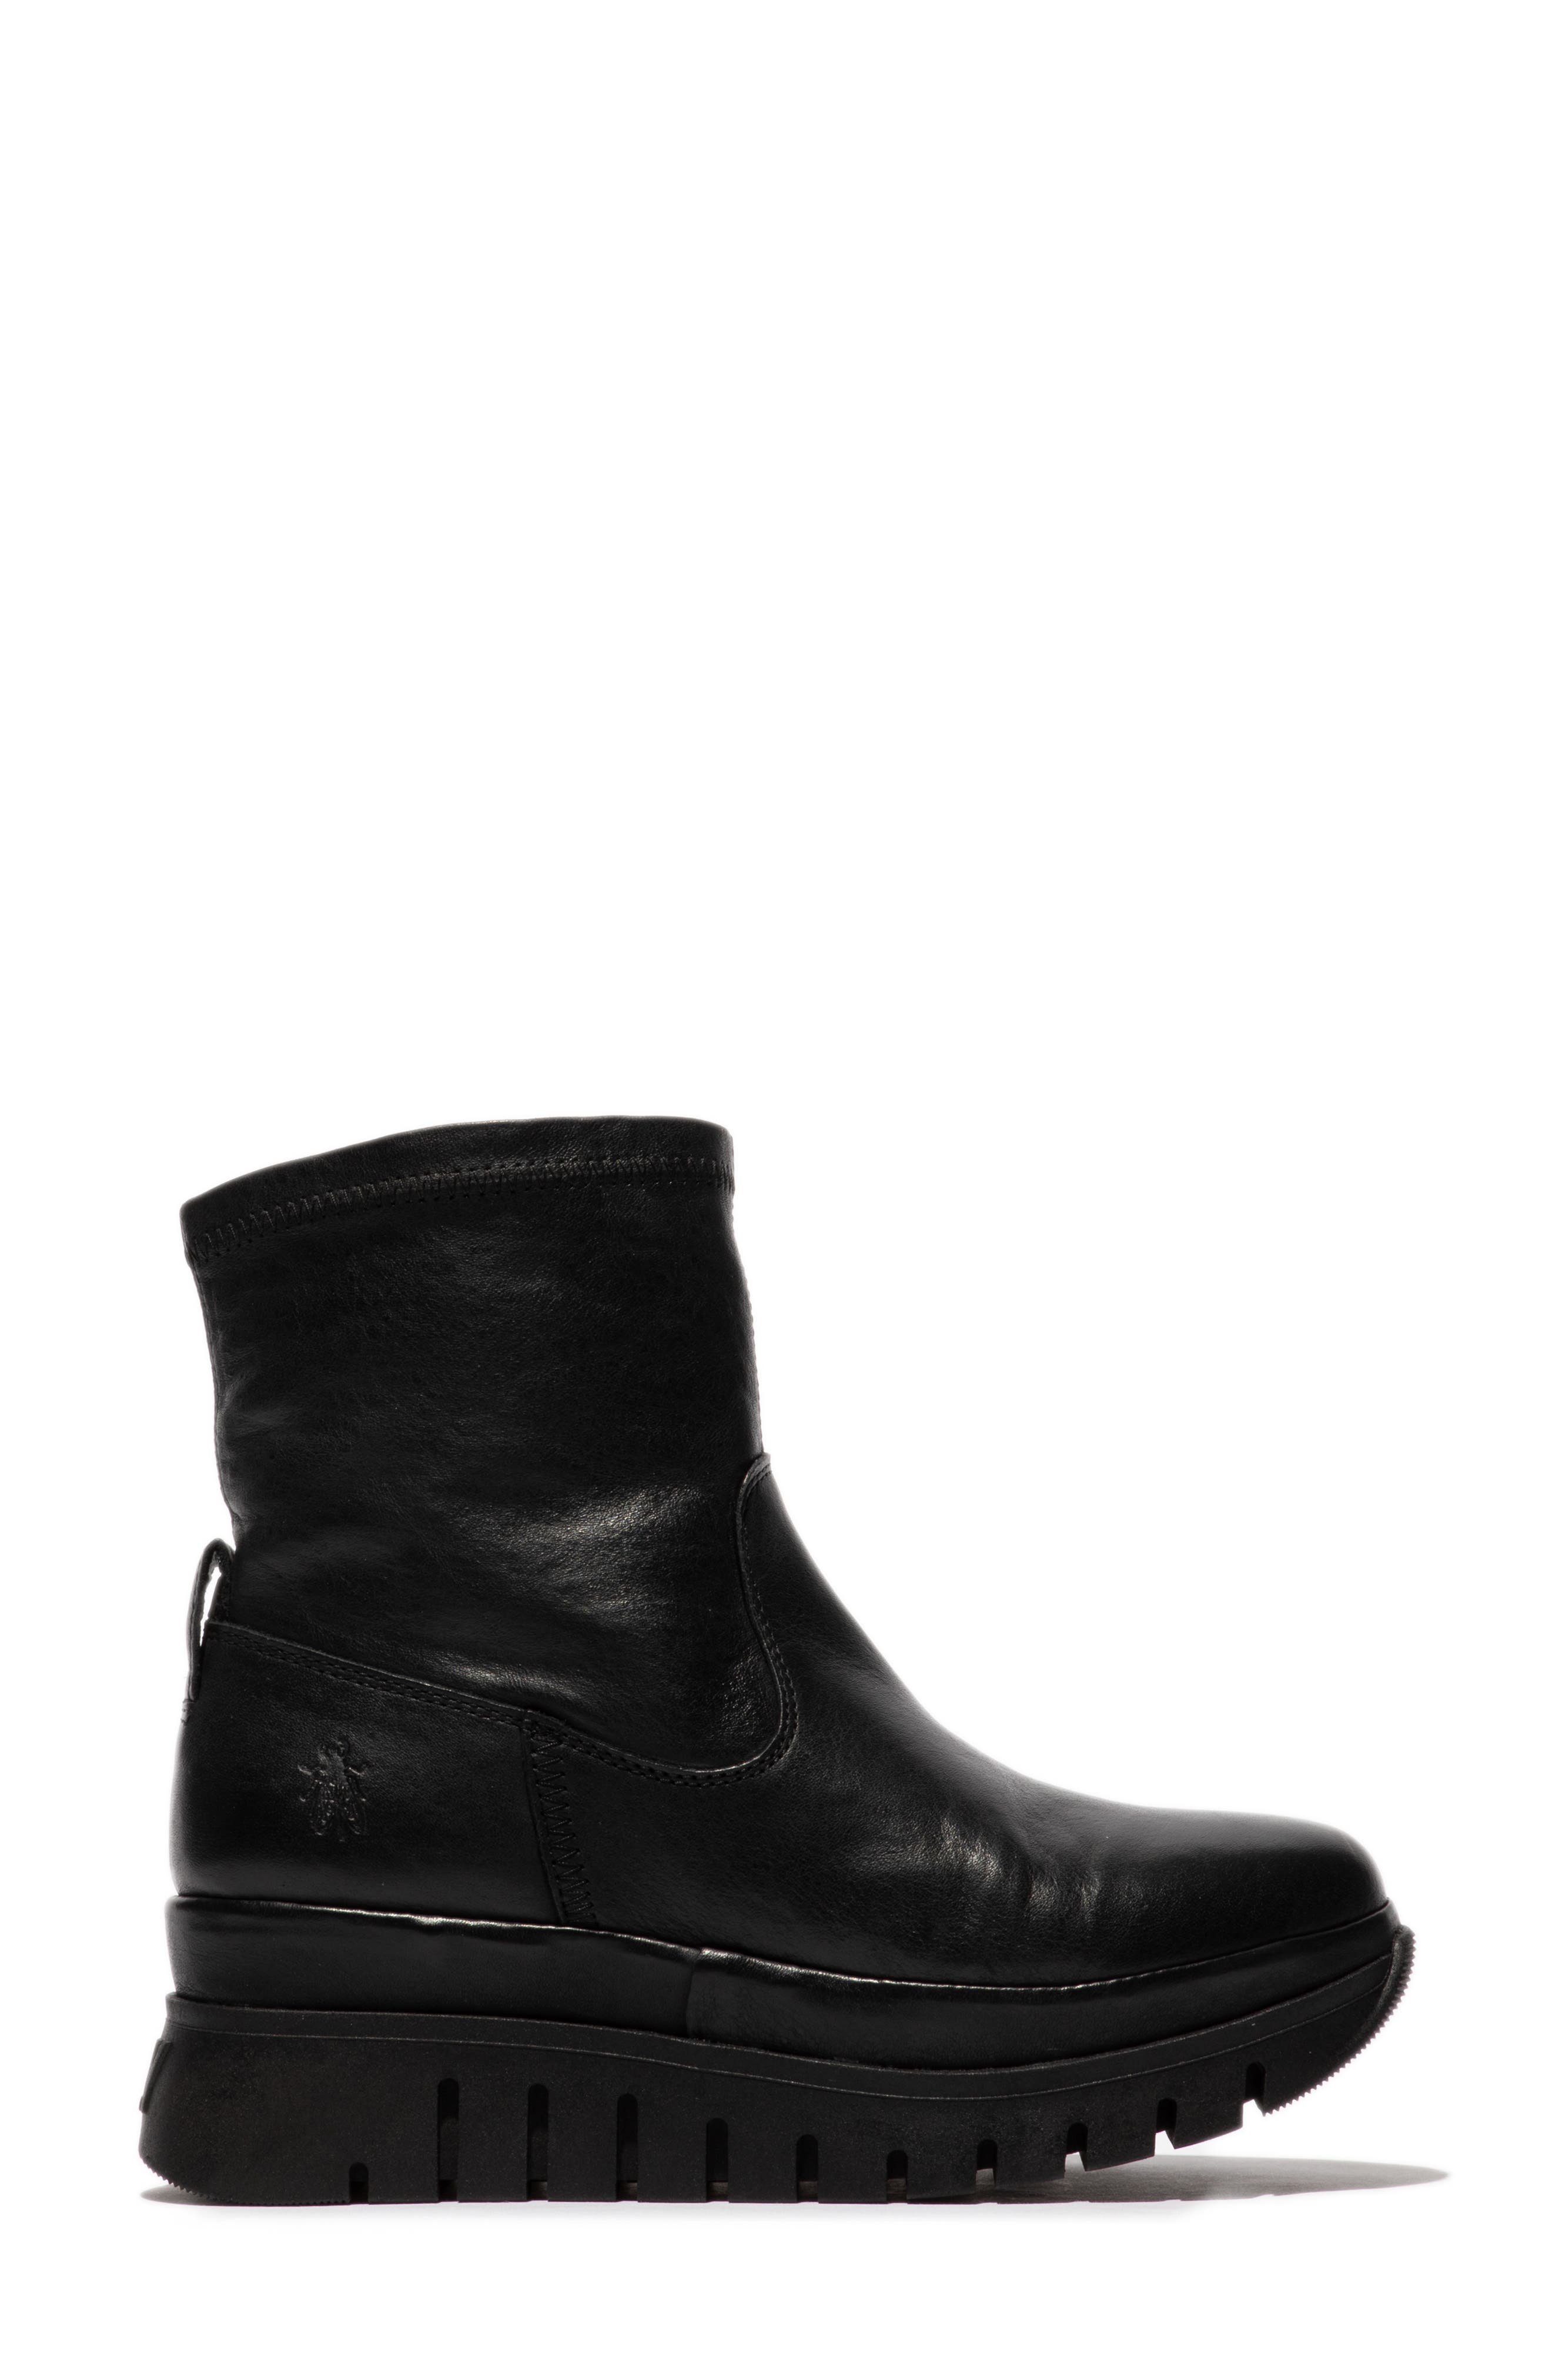 fly london boots womens